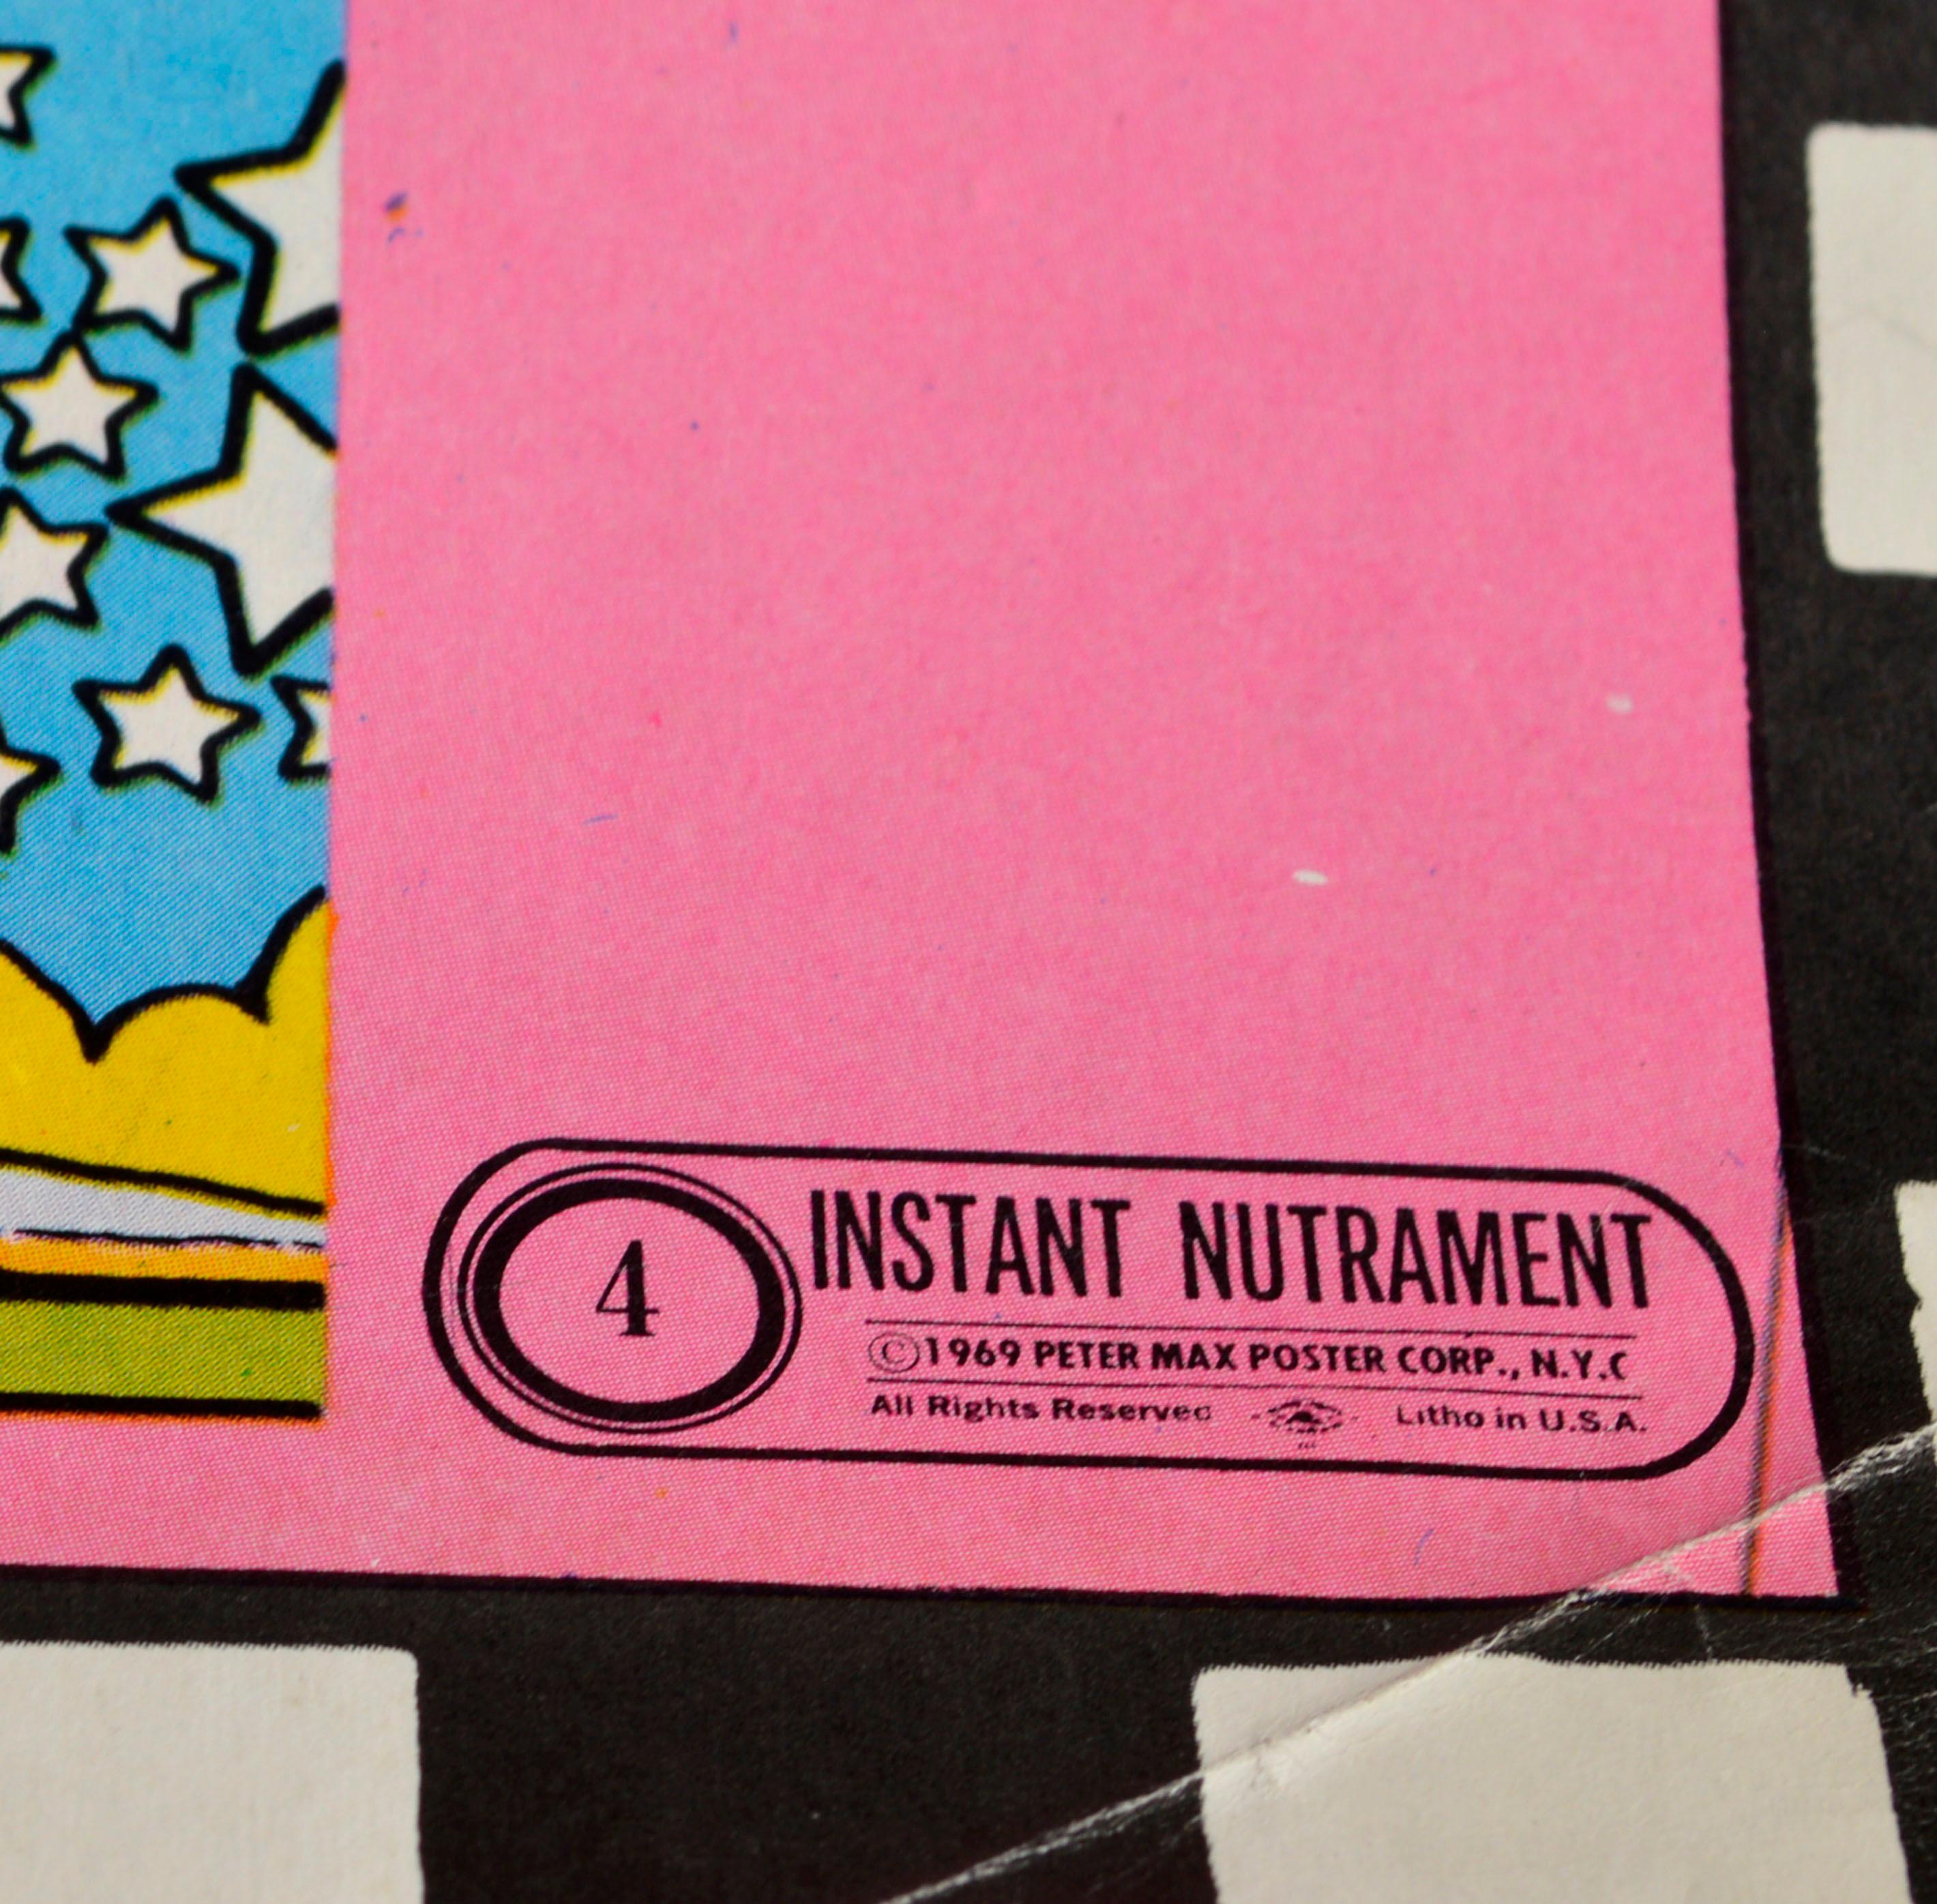 Instant Nutriment #4, 1969 - Modern Pop Art Psychedelic Print

 A vintage psychedelic print, Instant Nutriment #4, 1969 by Peter Max (German, b. 1937). Unframed. Shipped Rolled in tube. Some edge wear to paper. Image: 36